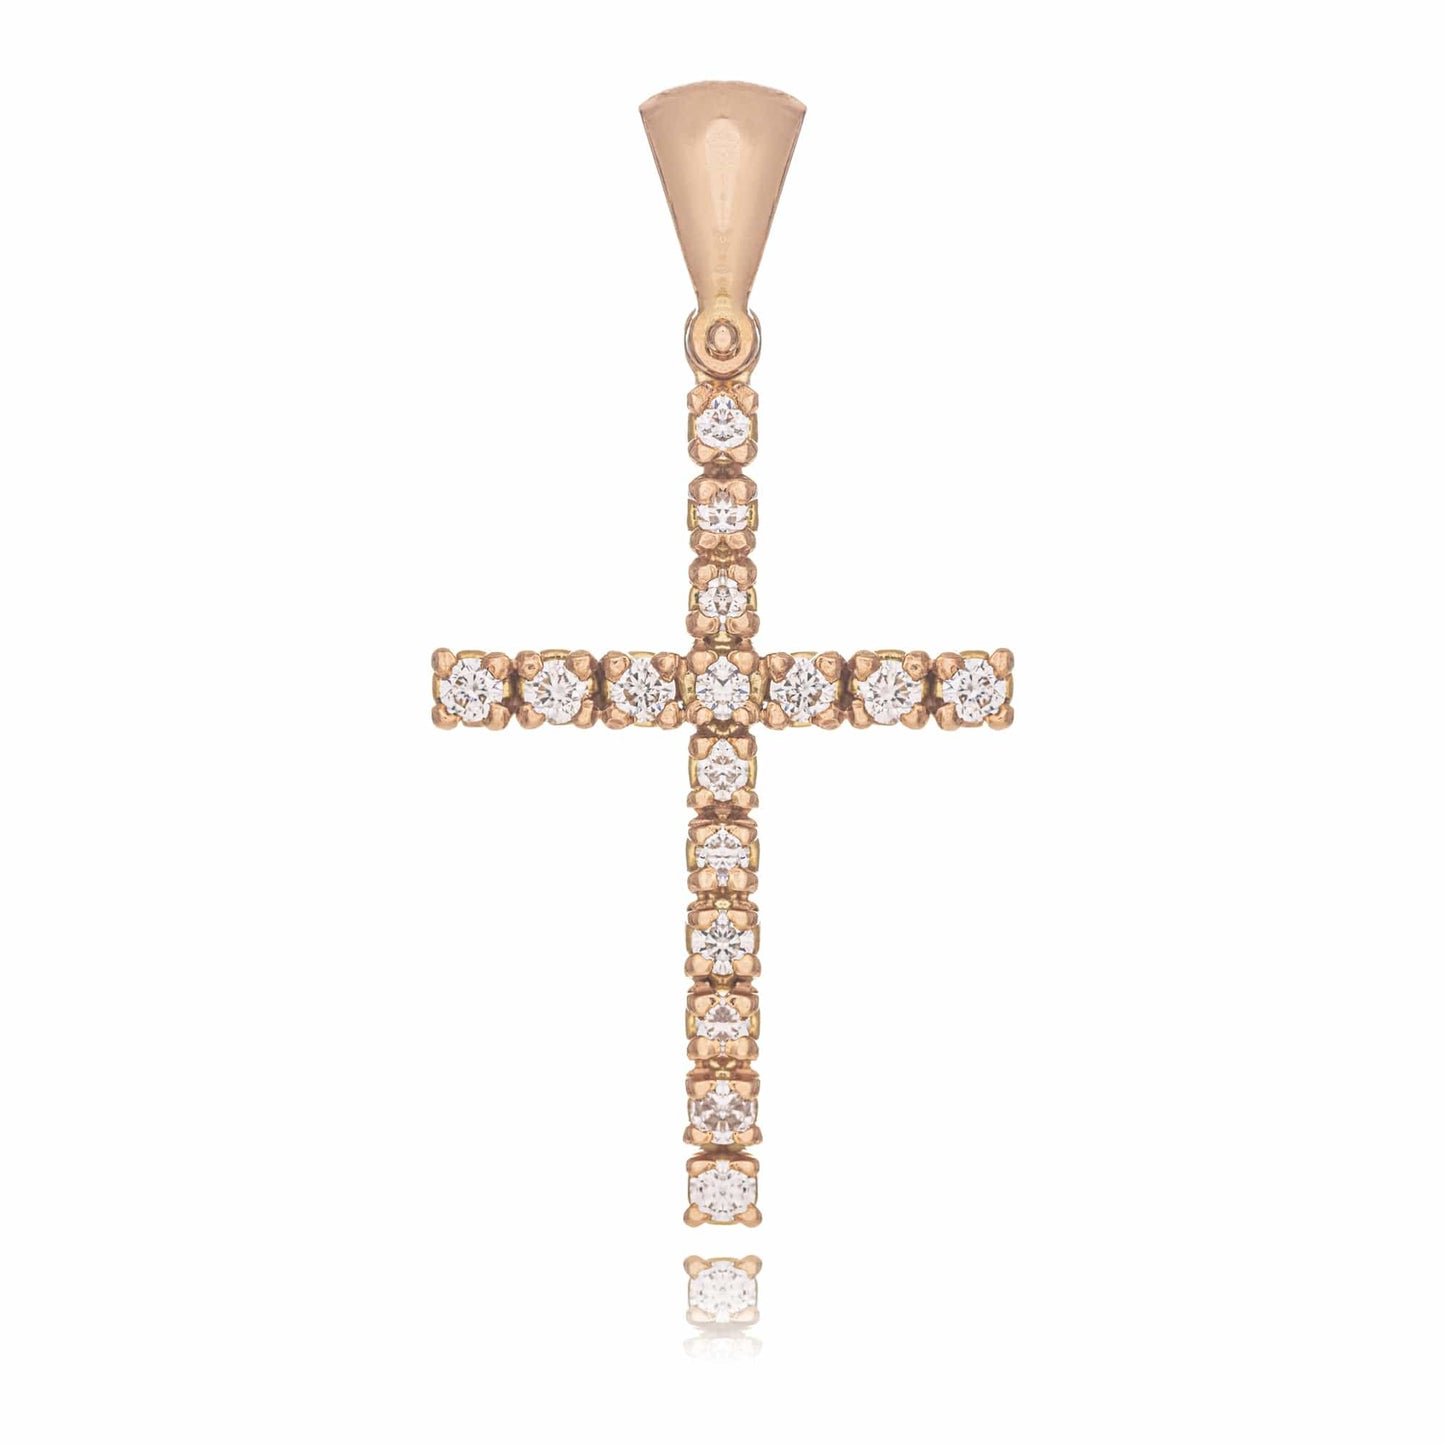 MONDO CATTOLICO Jewelry Cm 2.2 (0.86 in) / Cm 1.4 (0.55 in) Pink Gold Cross with Diamonds